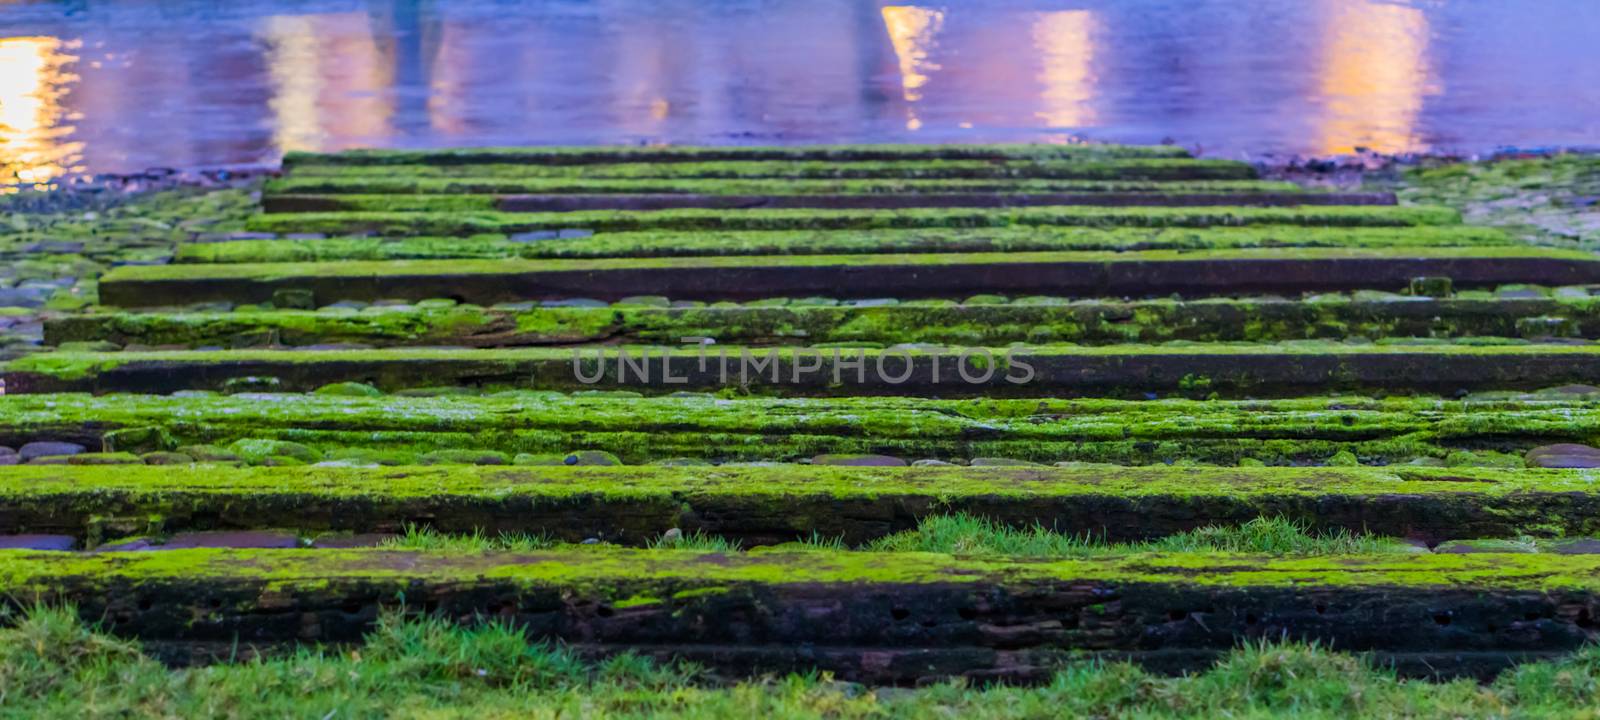 soothing nature background of mossy wooden beams and water reflecting light at night by charlottebleijenberg